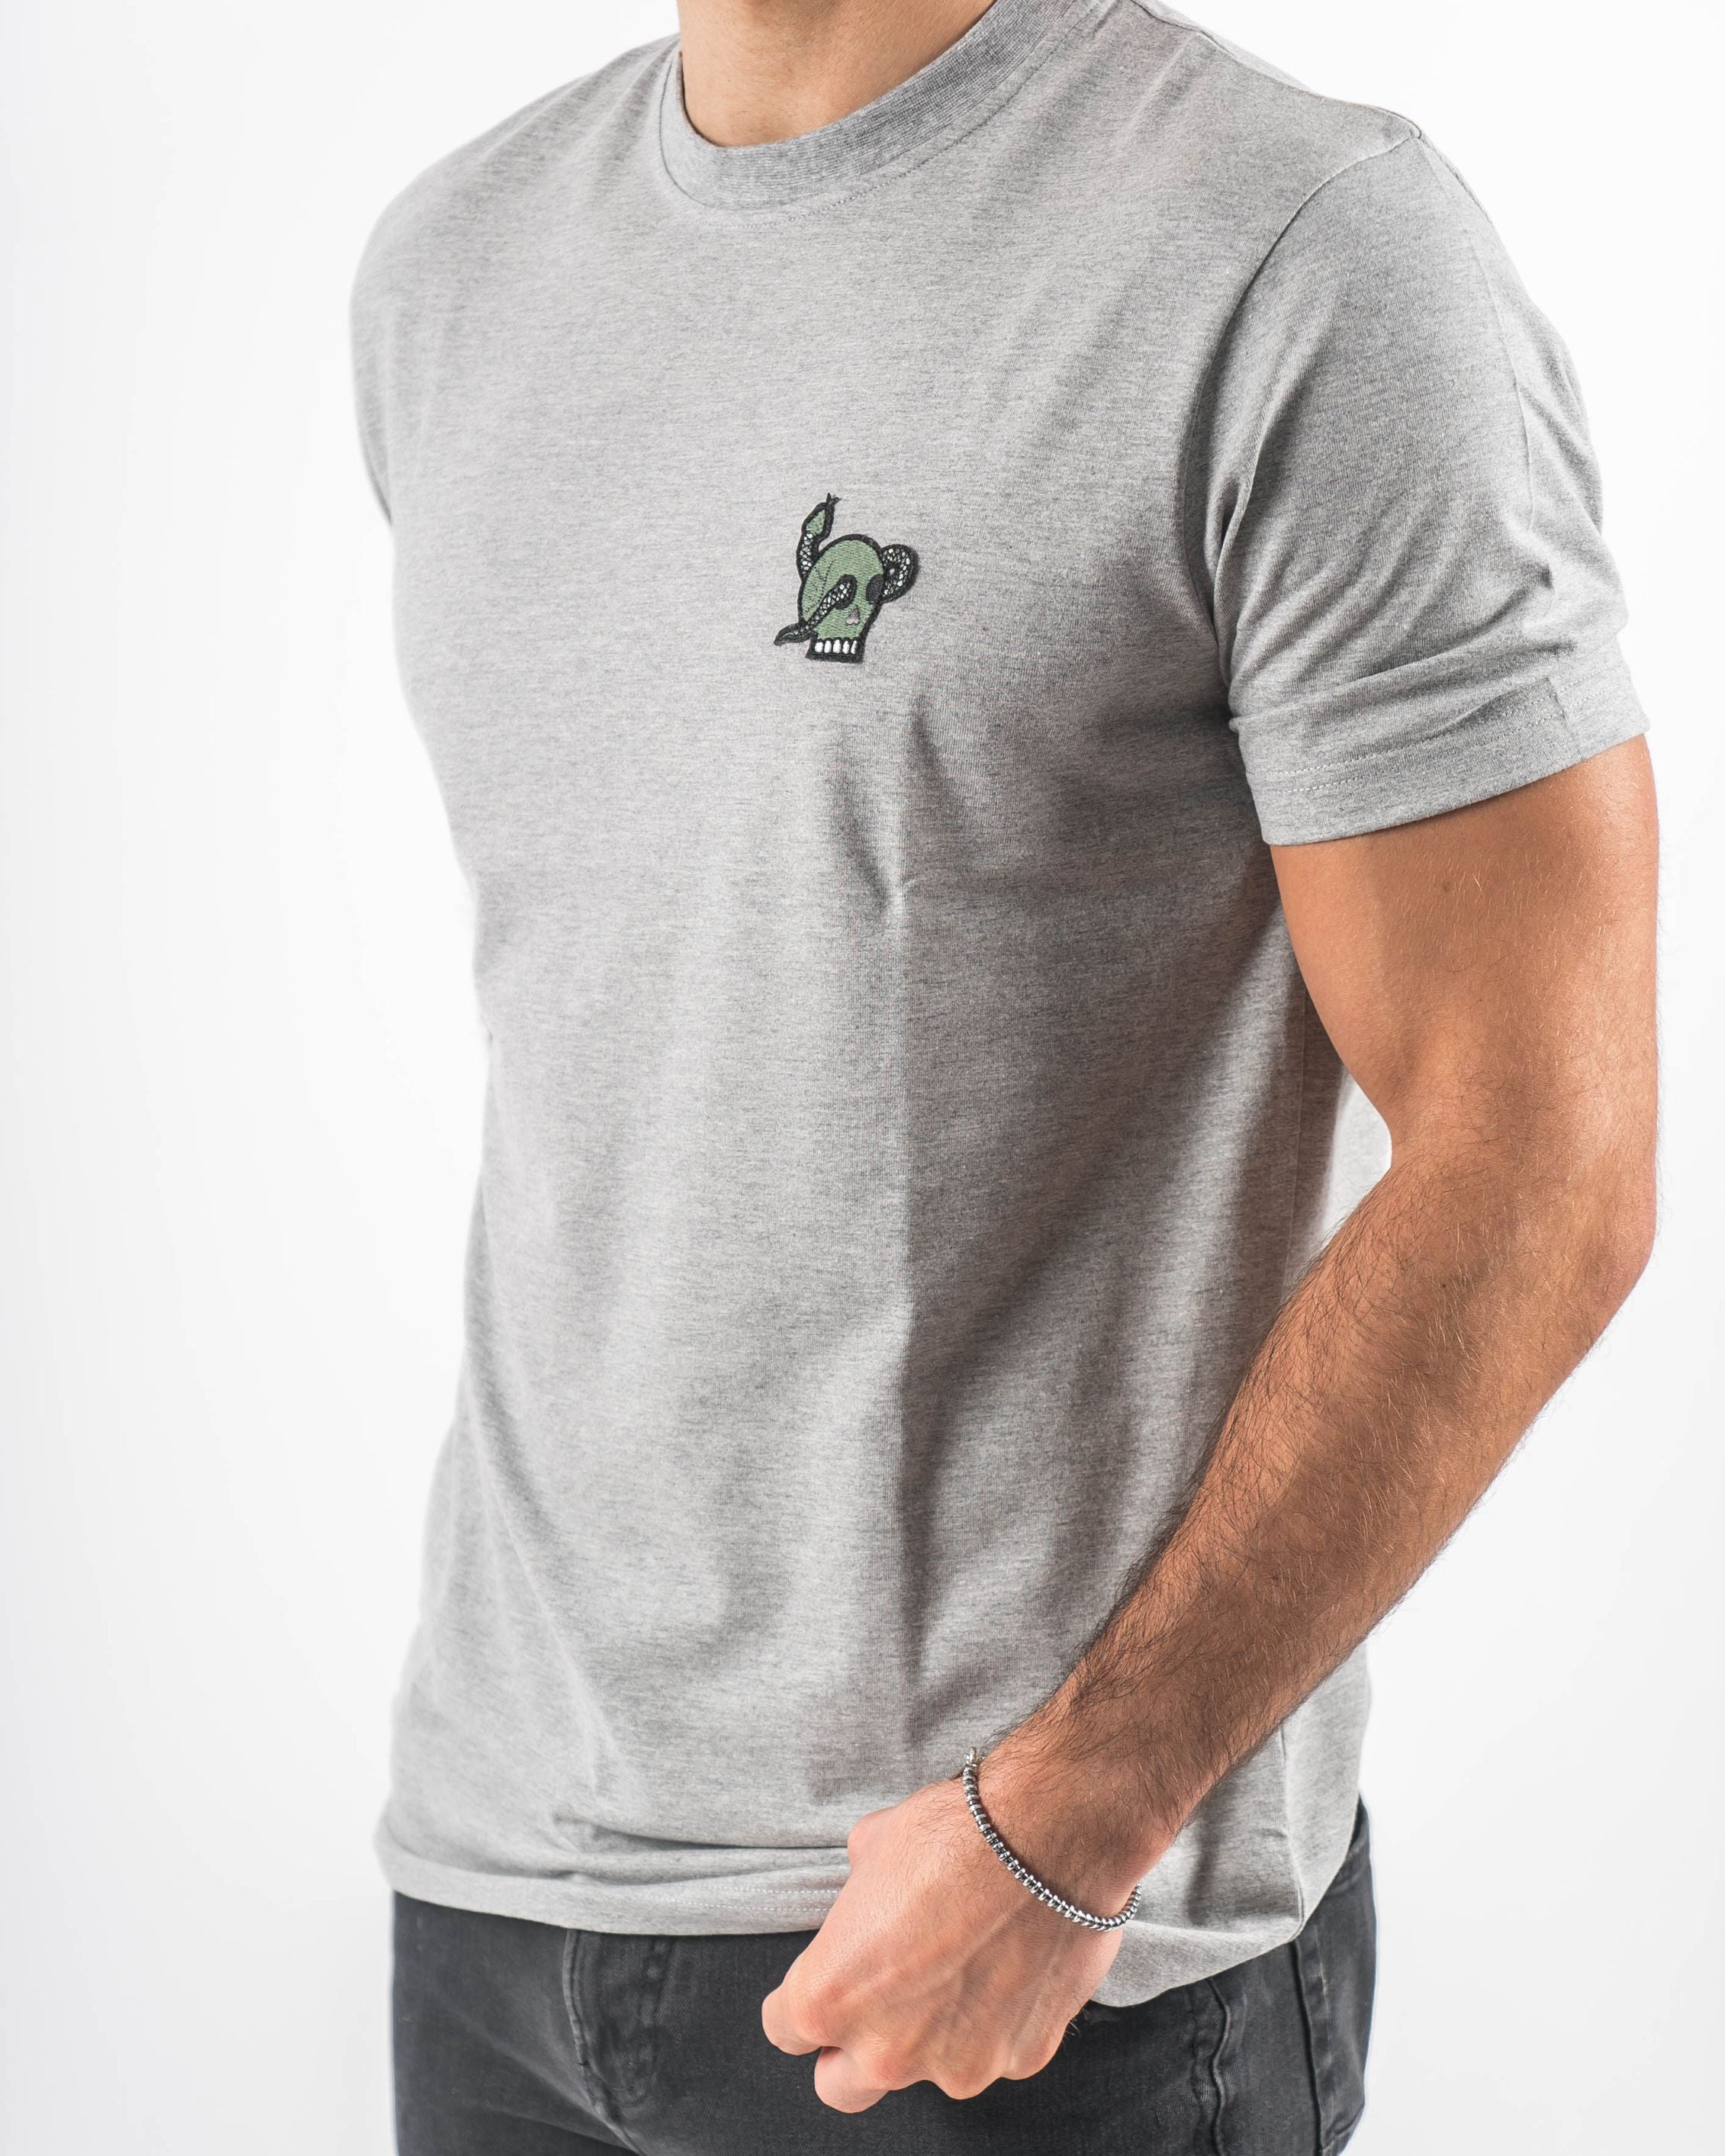 Grey t-shirt with skull embroided made in Portugal